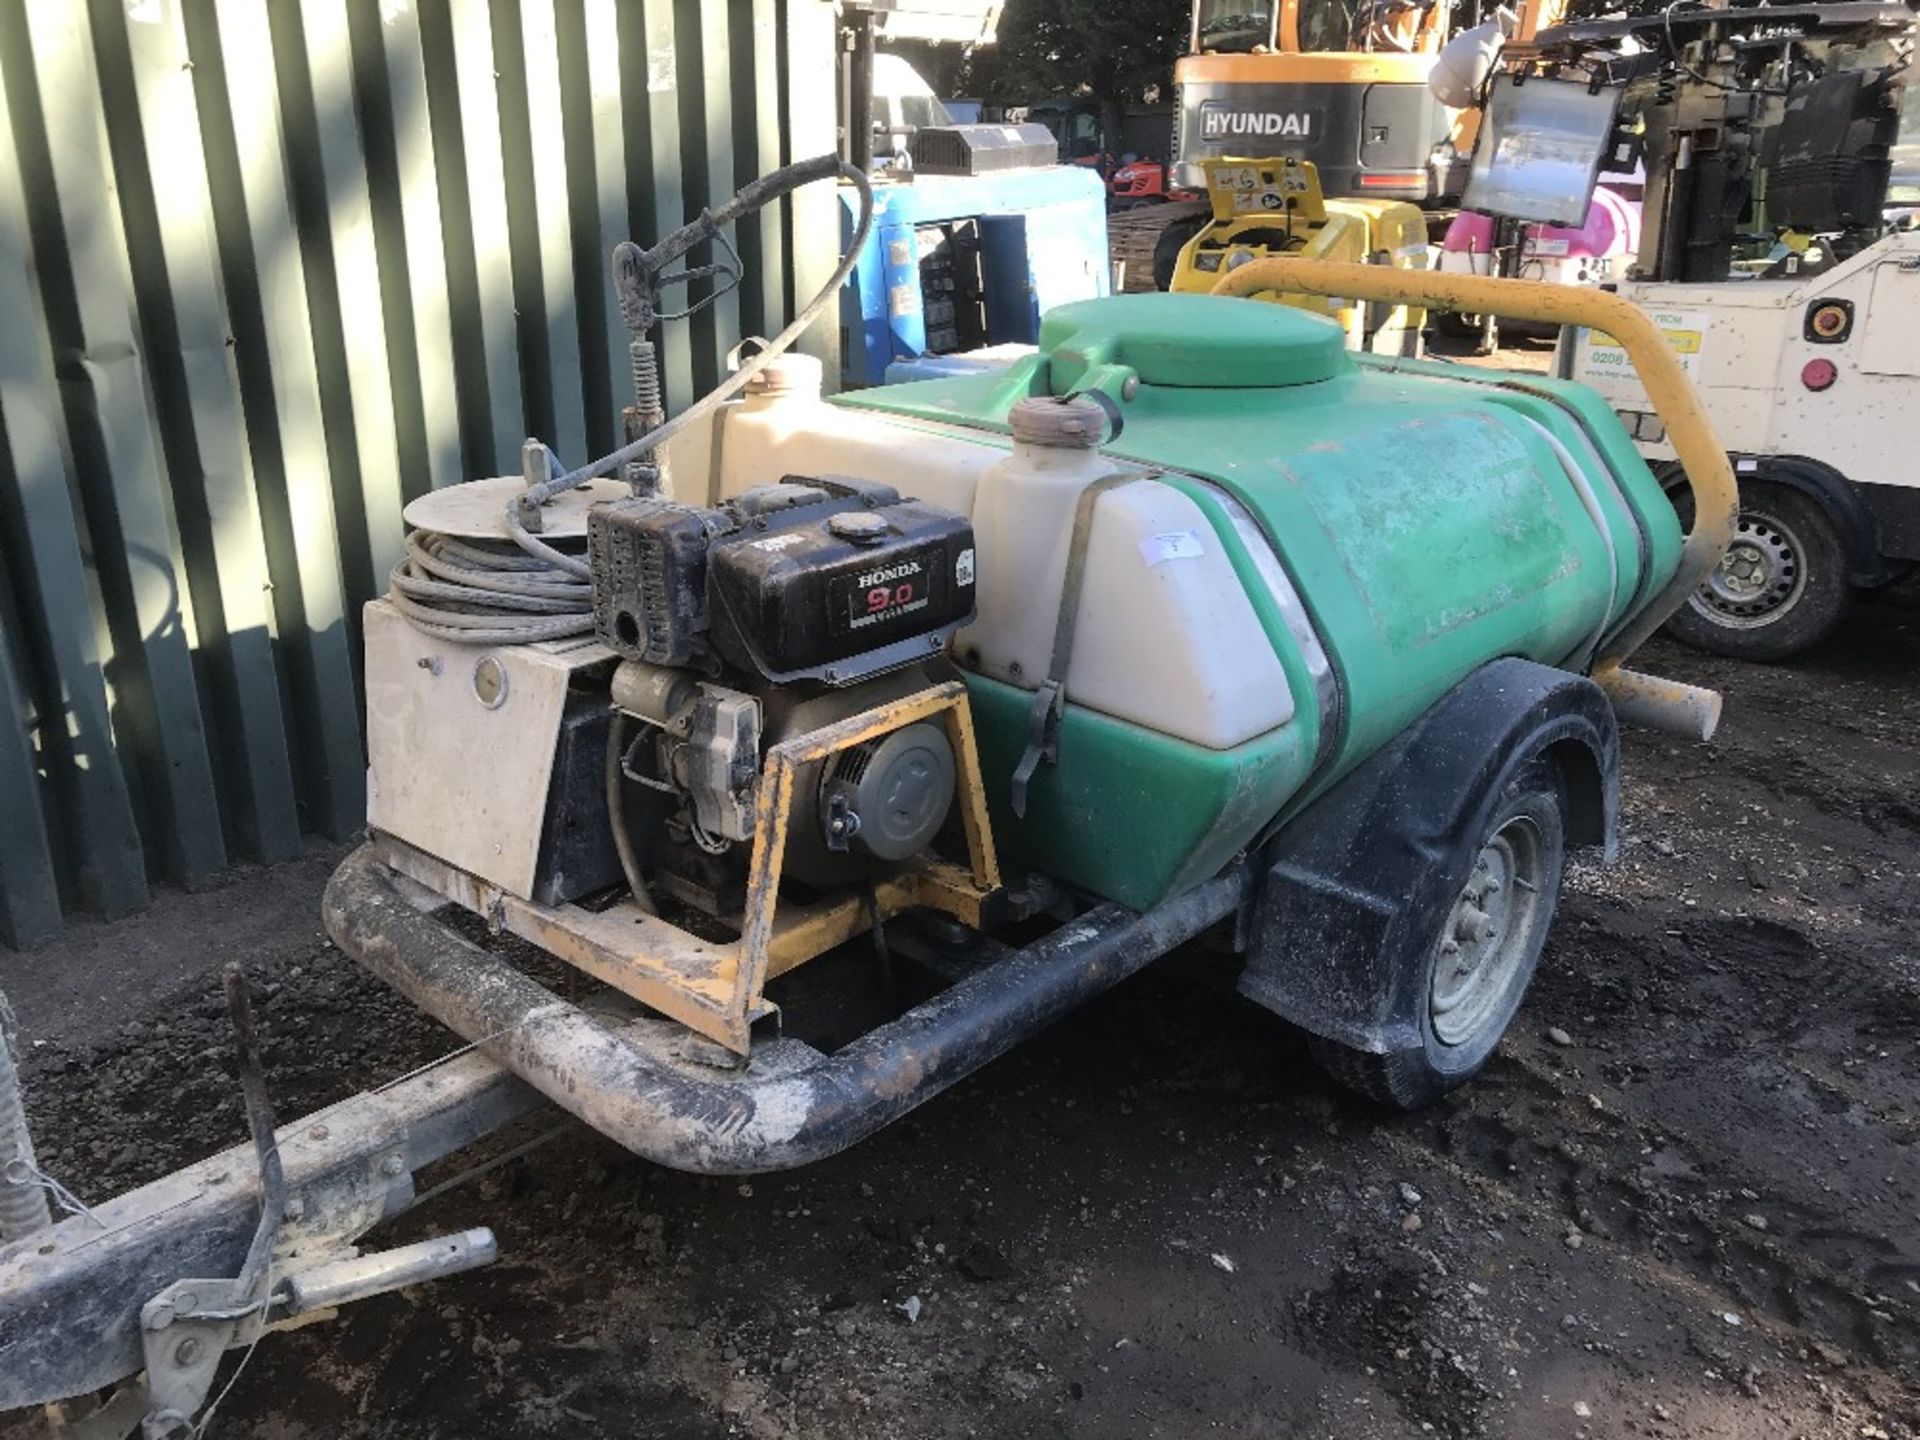 HONDA ENGINED BRENDON TOWED PRESSURE WASHER BOWSER. WHEN TESTED WAS SEEN TO RUN, PUMPING UNTESTED AS